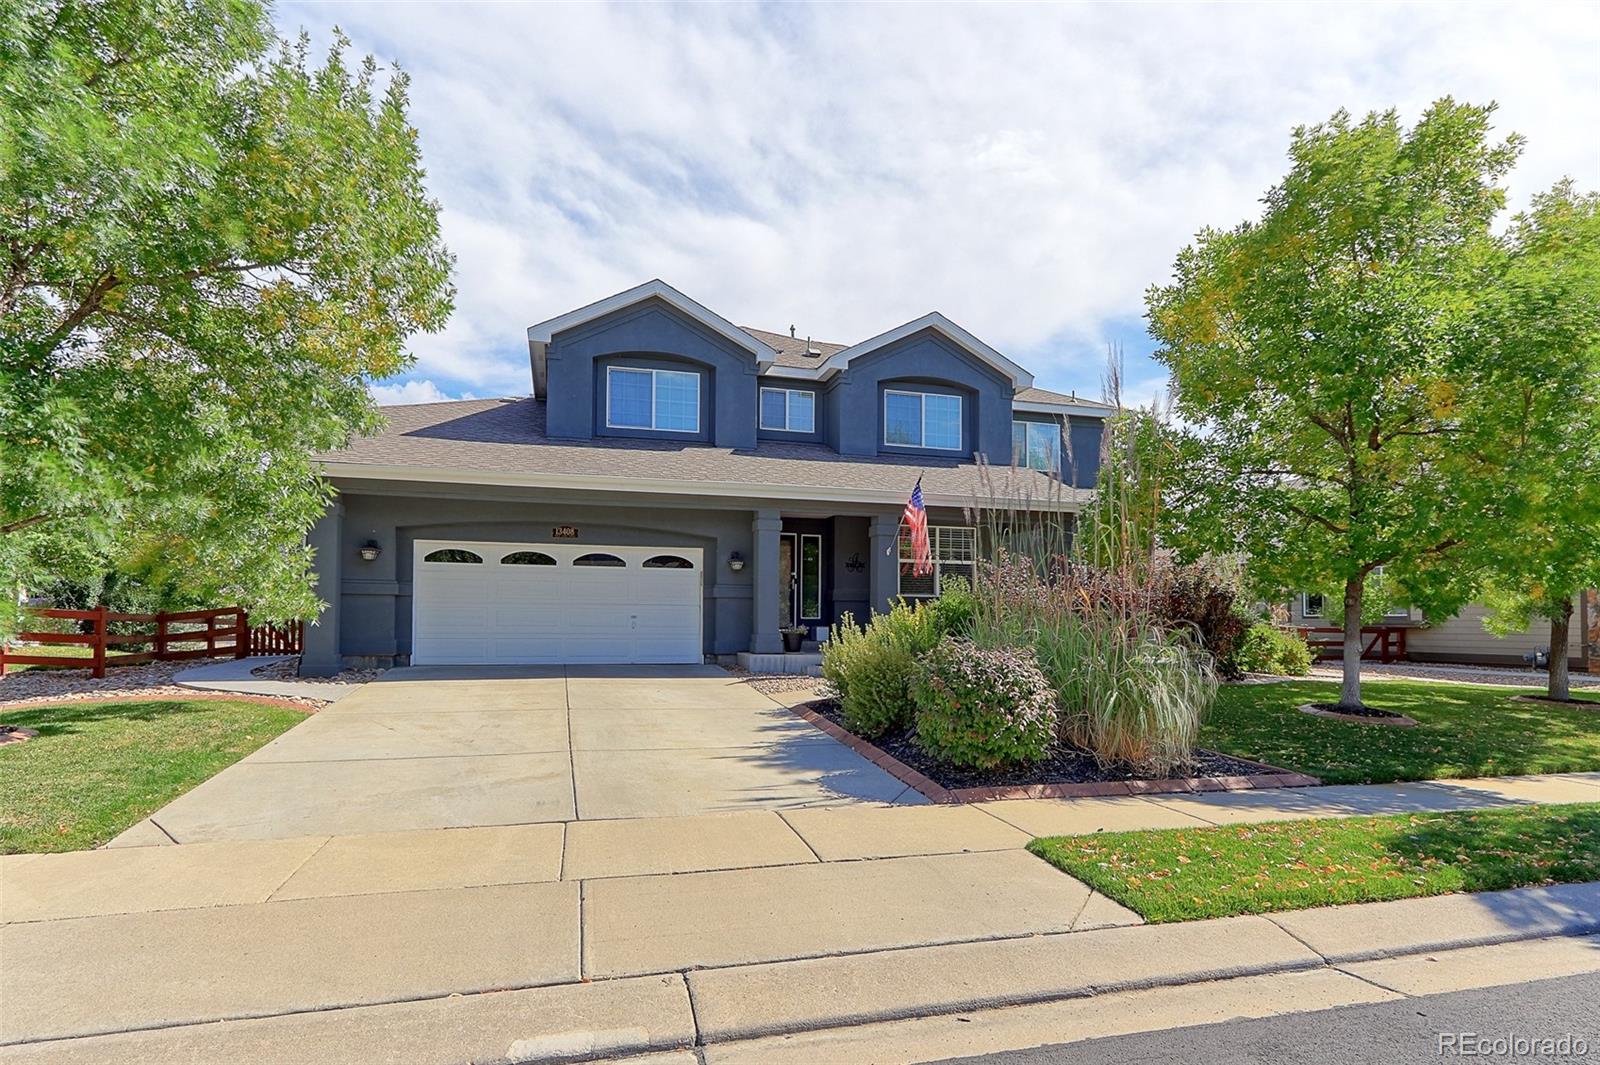 13408  king lake trail, Broomfield sold home. Closed on 2023-12-07 for $1,000,000.